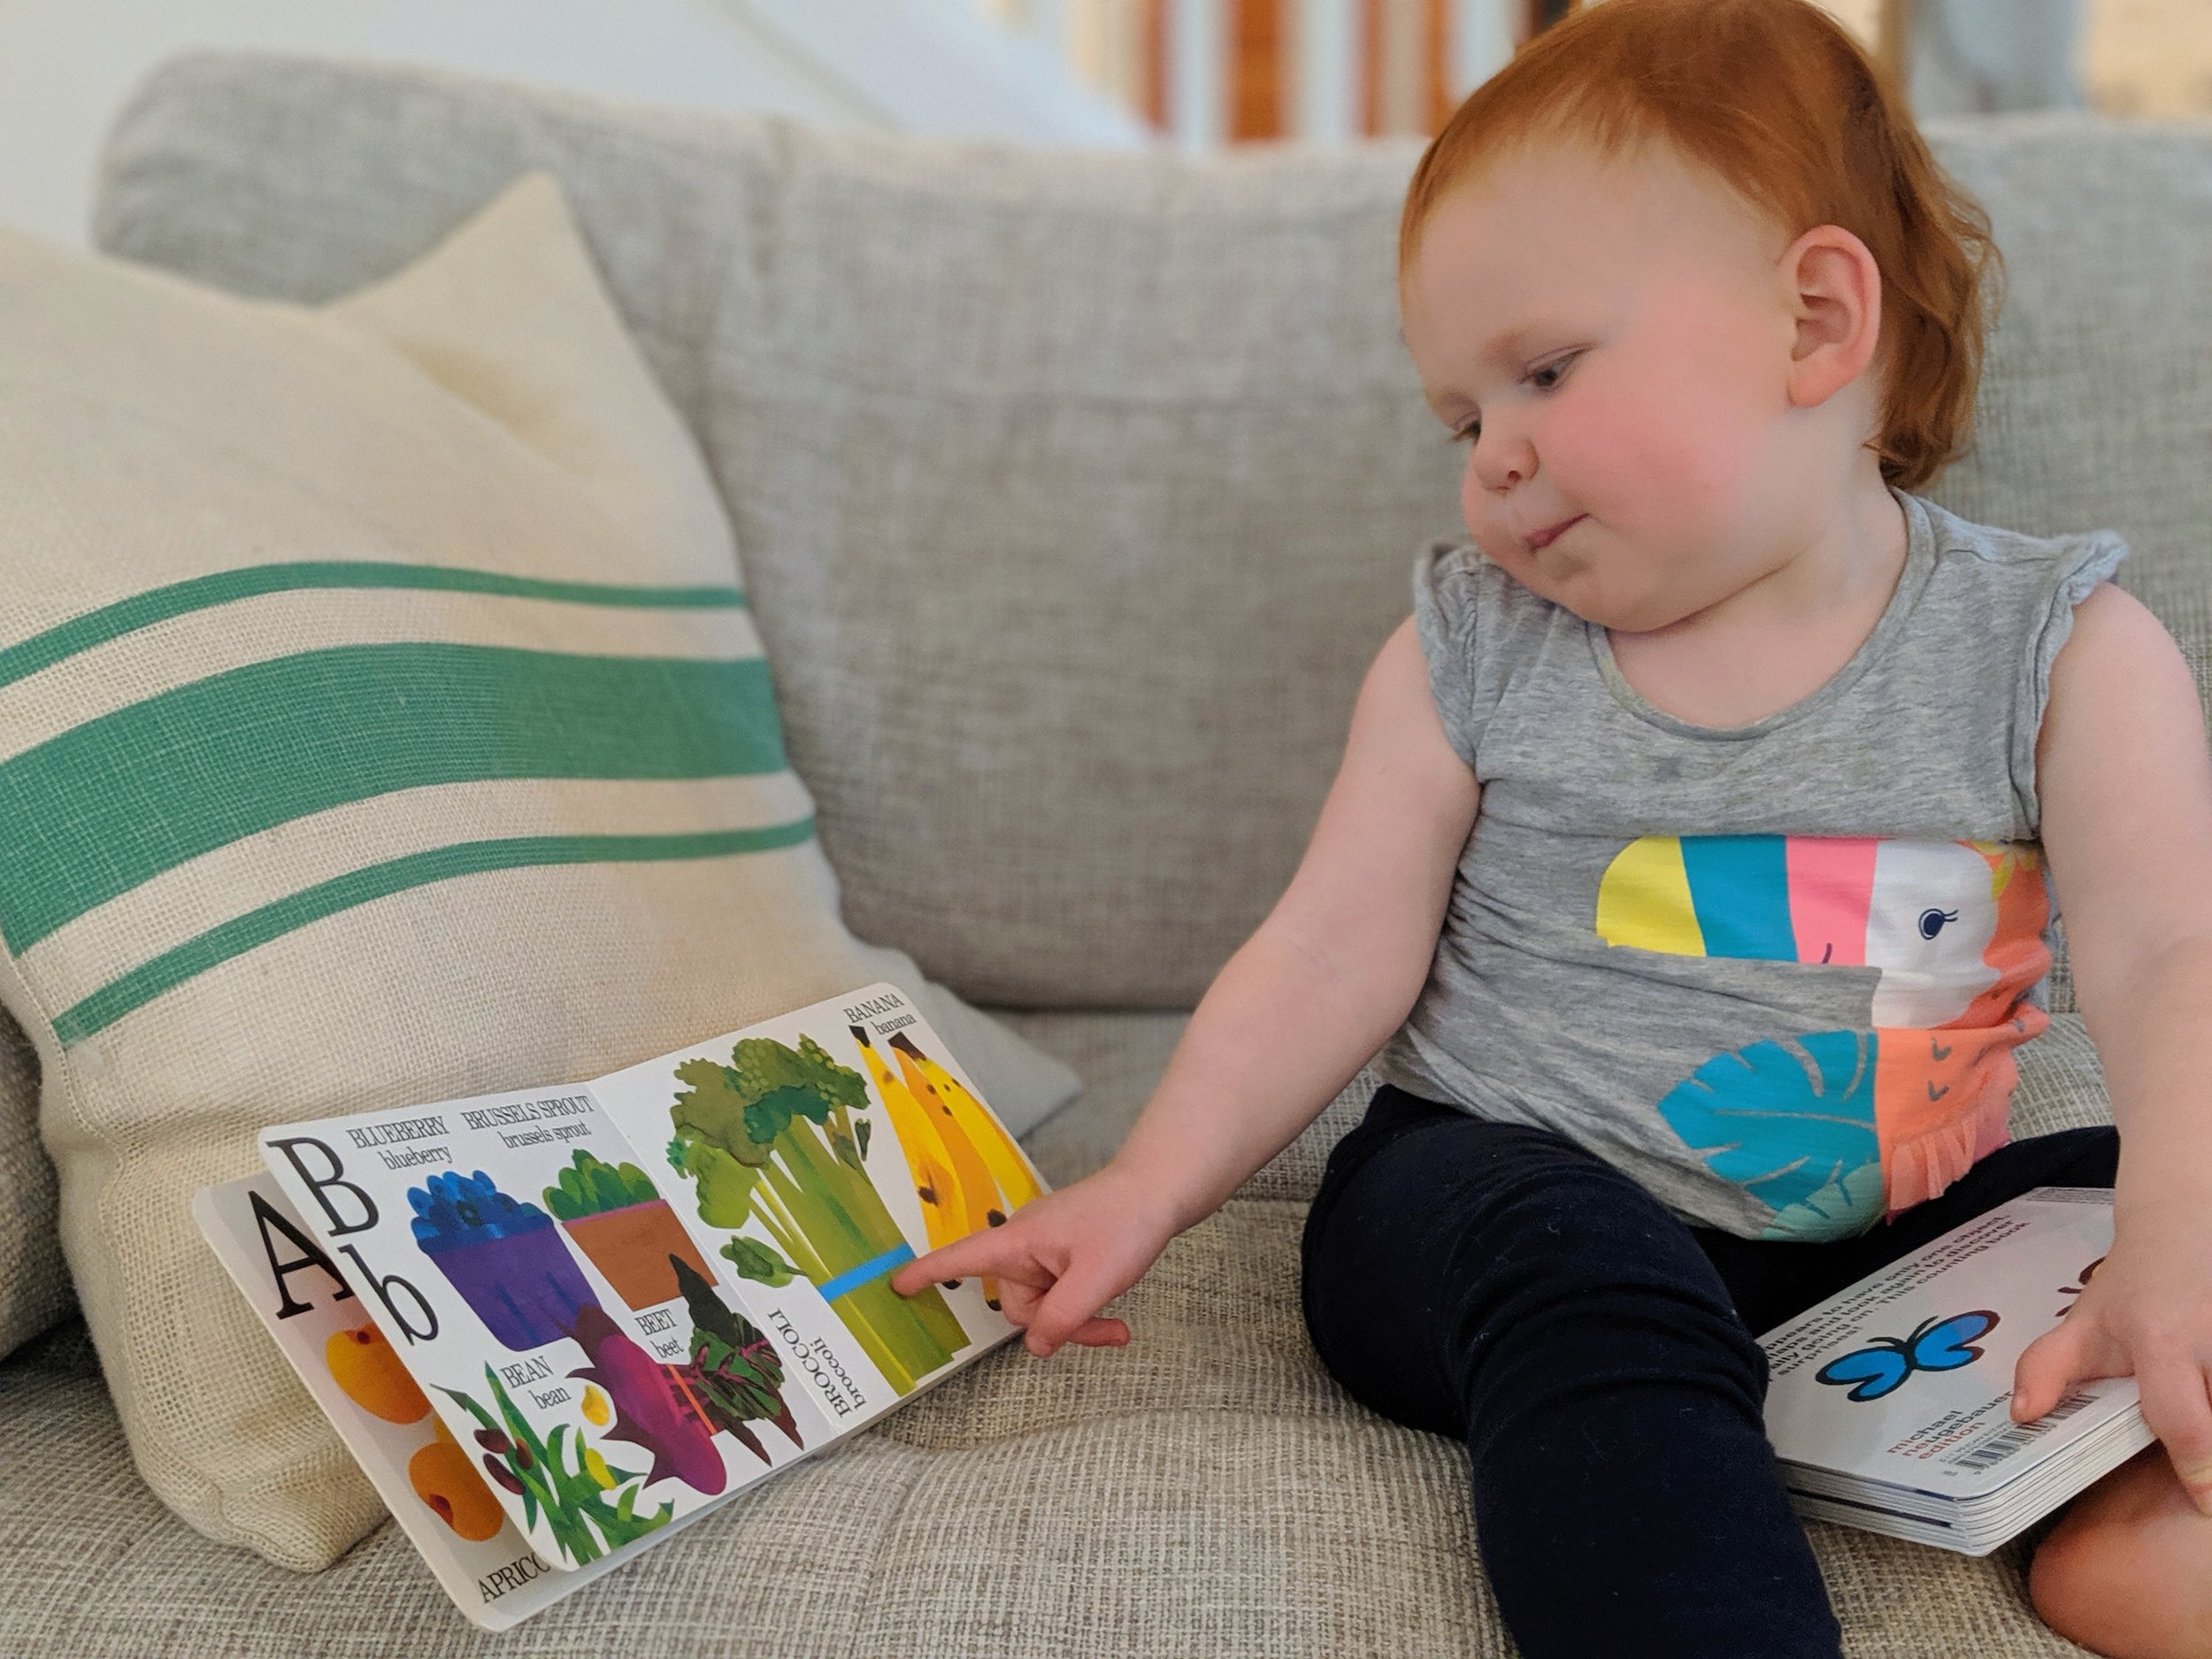 A Little Book About - Best Board Books for Babies and Toddlers